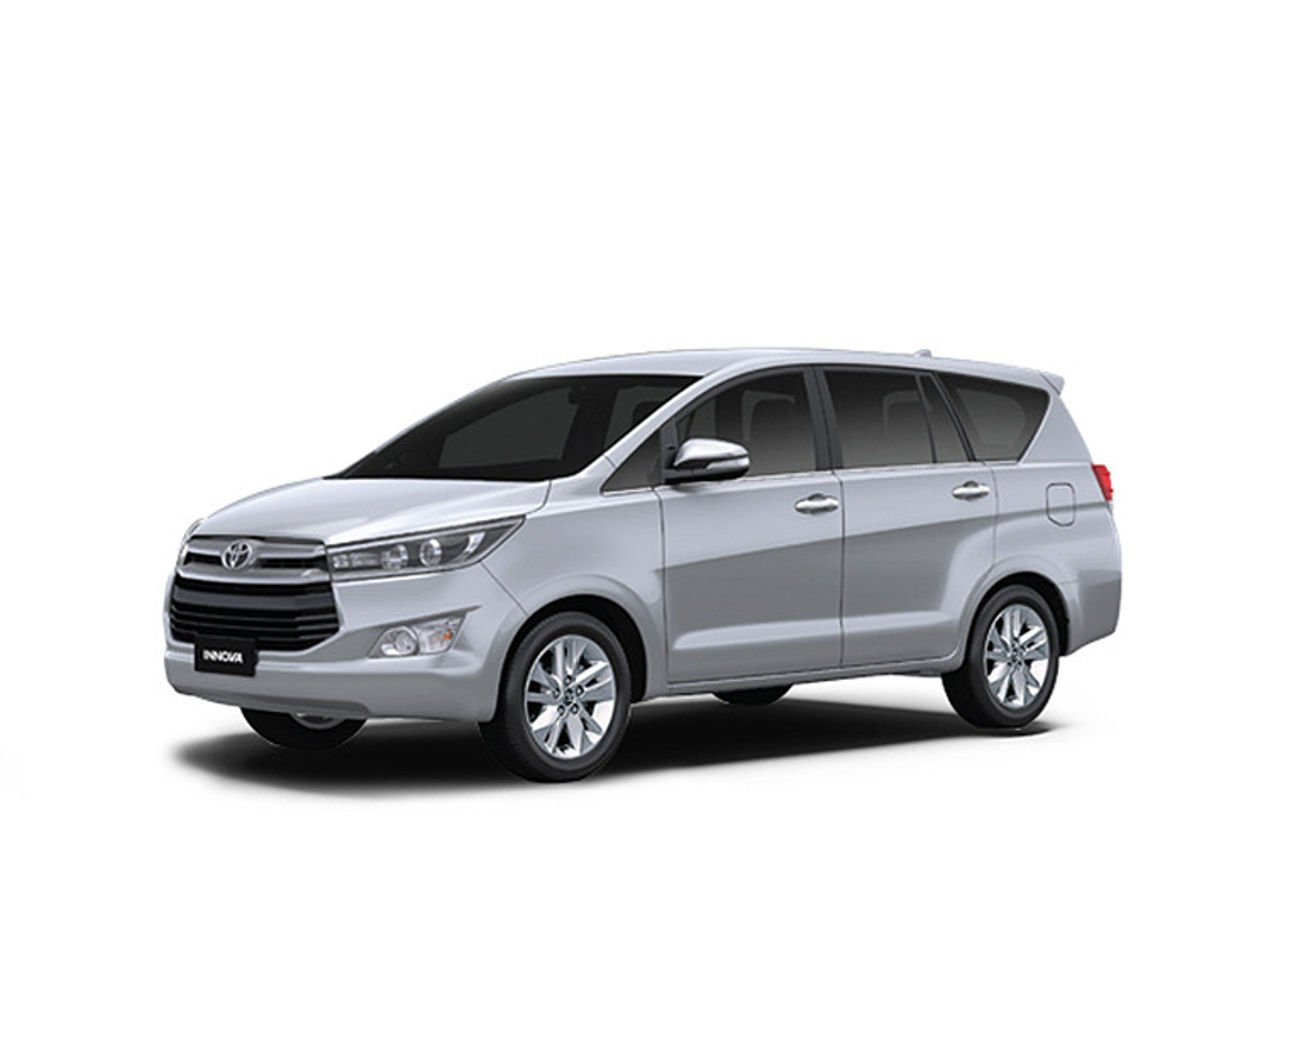 Toyota Innova Crysta Prices In Patna Specs Colors Showrooms